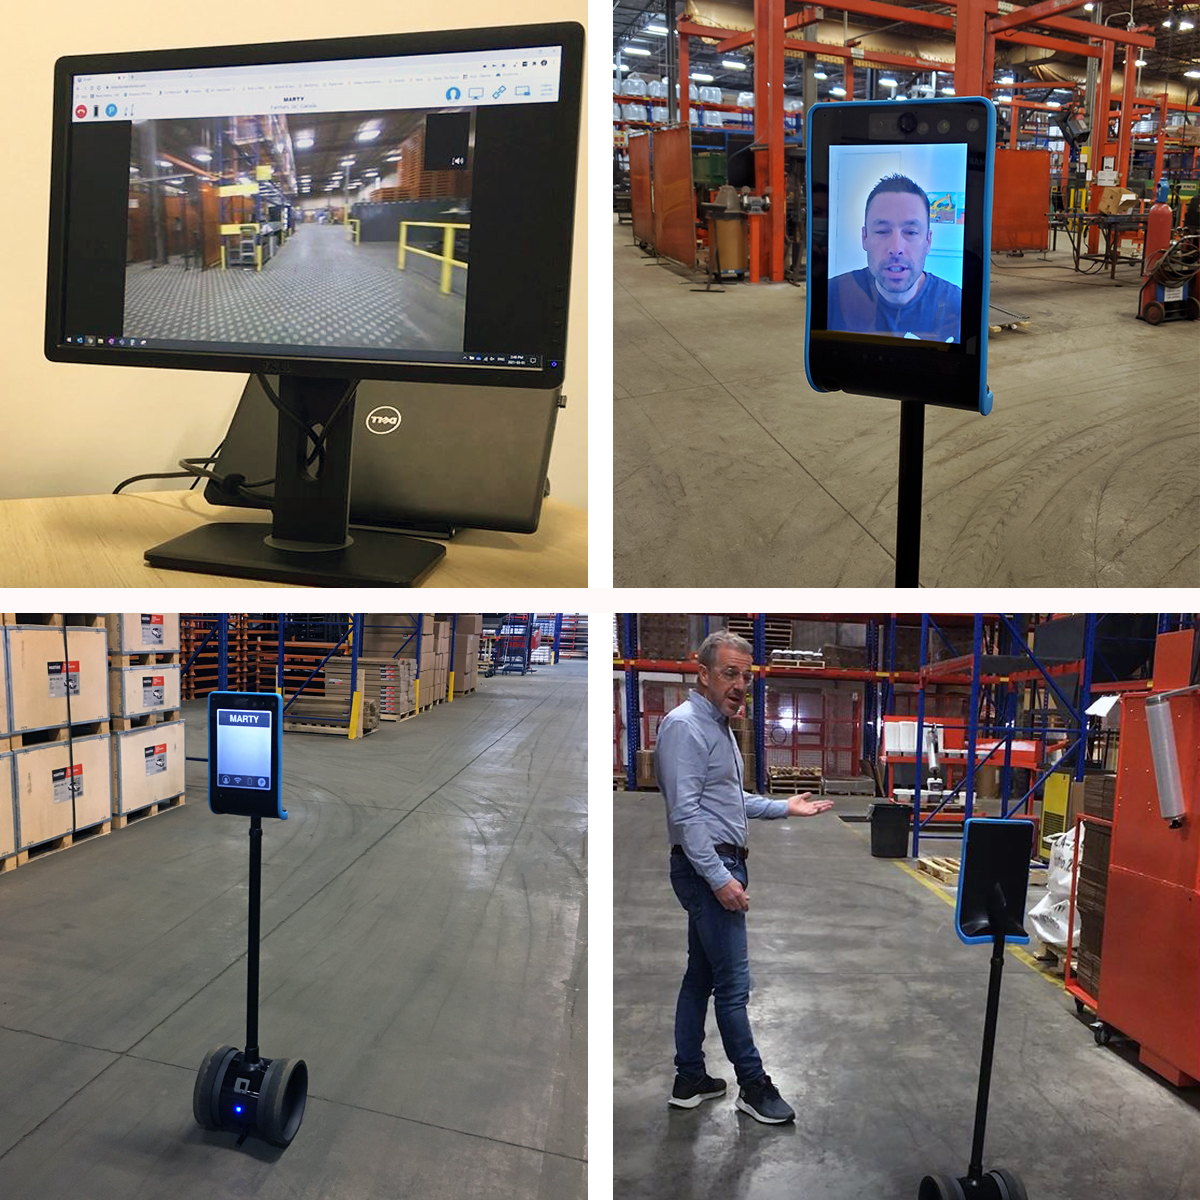 Martins Industries “welcomes” robot tour guide